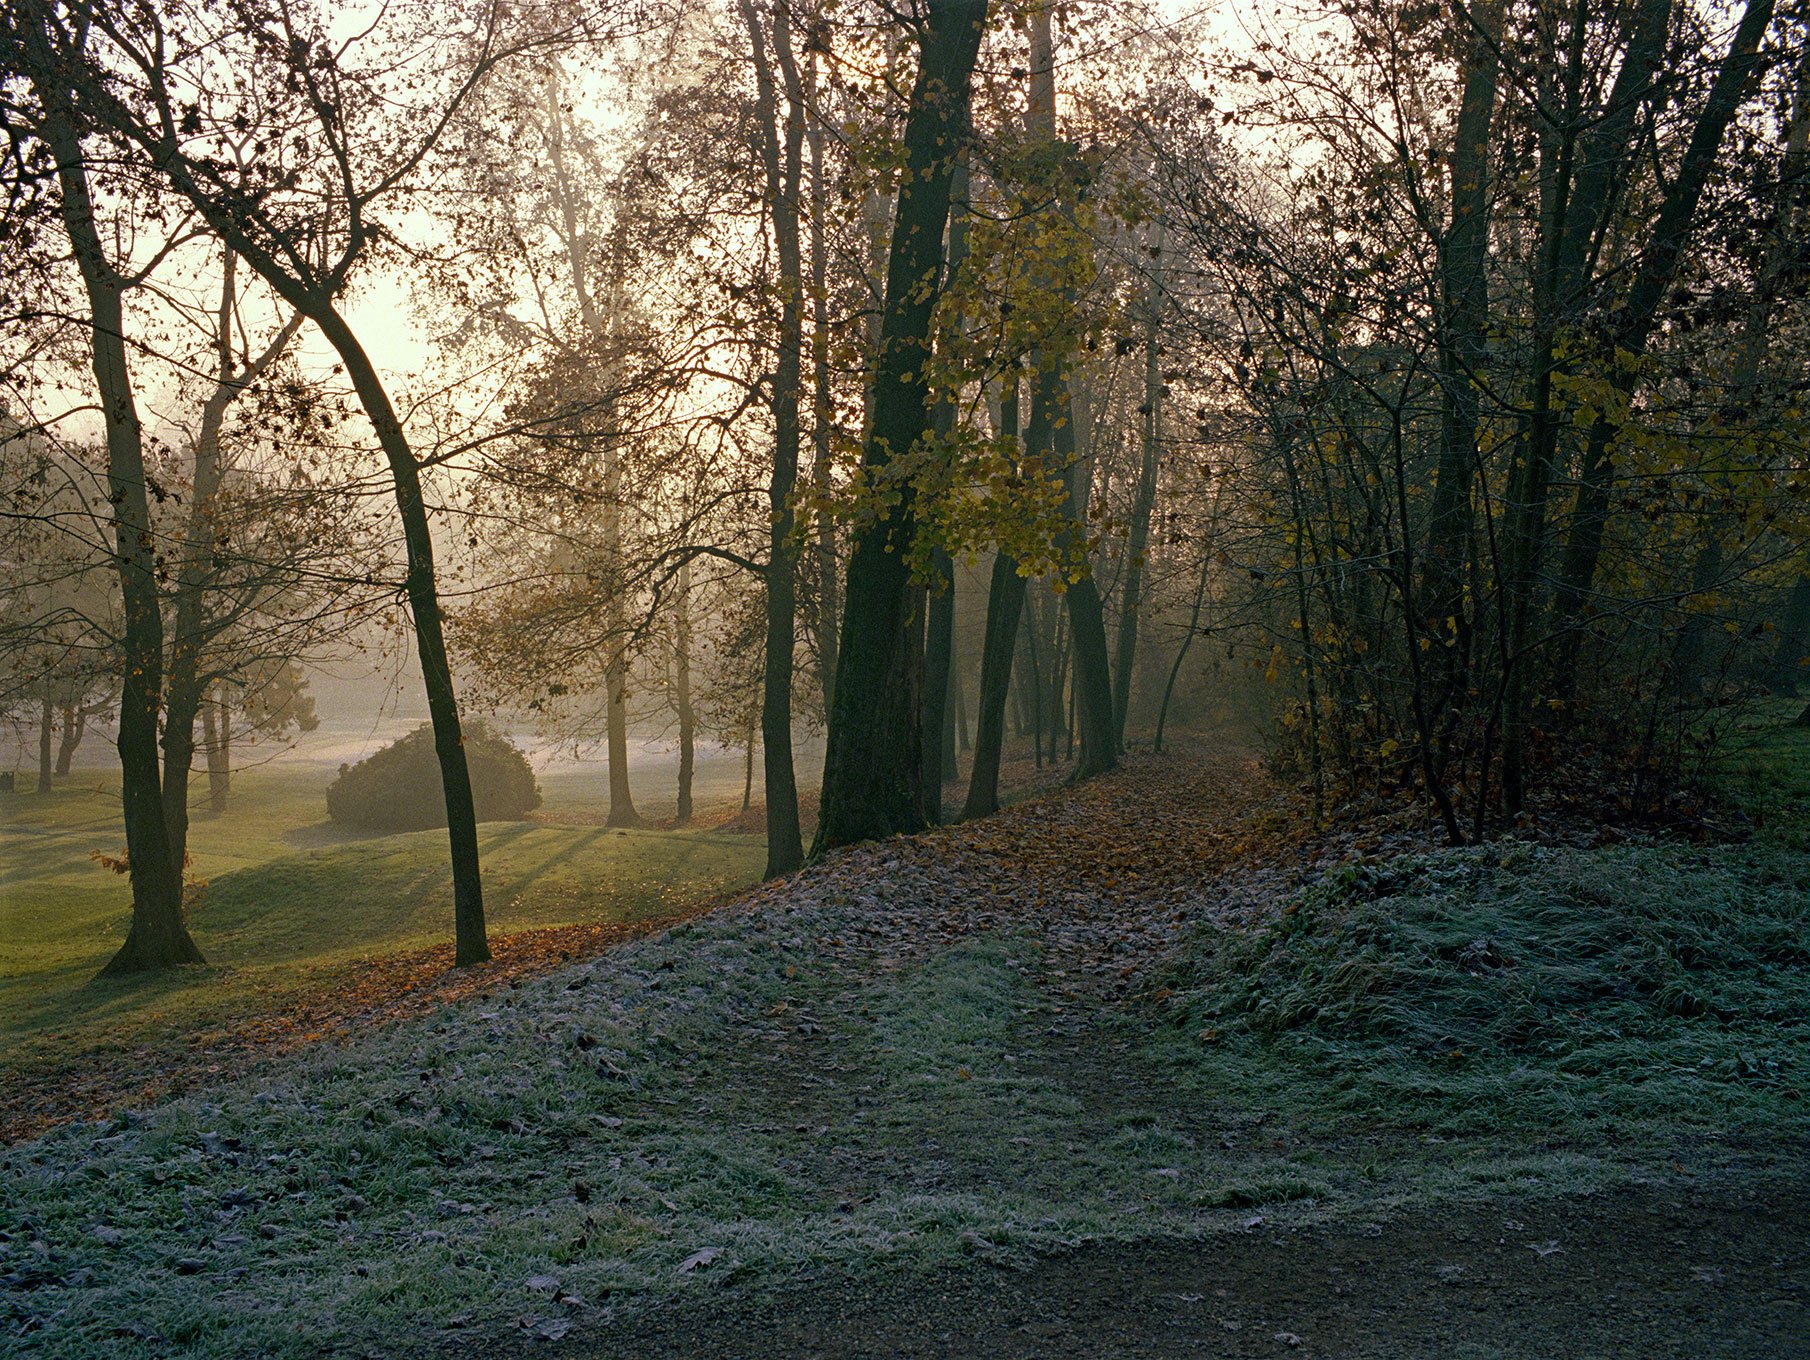   For more info: →    Monza Park     Woods in late autumn, #1,  December 2020  